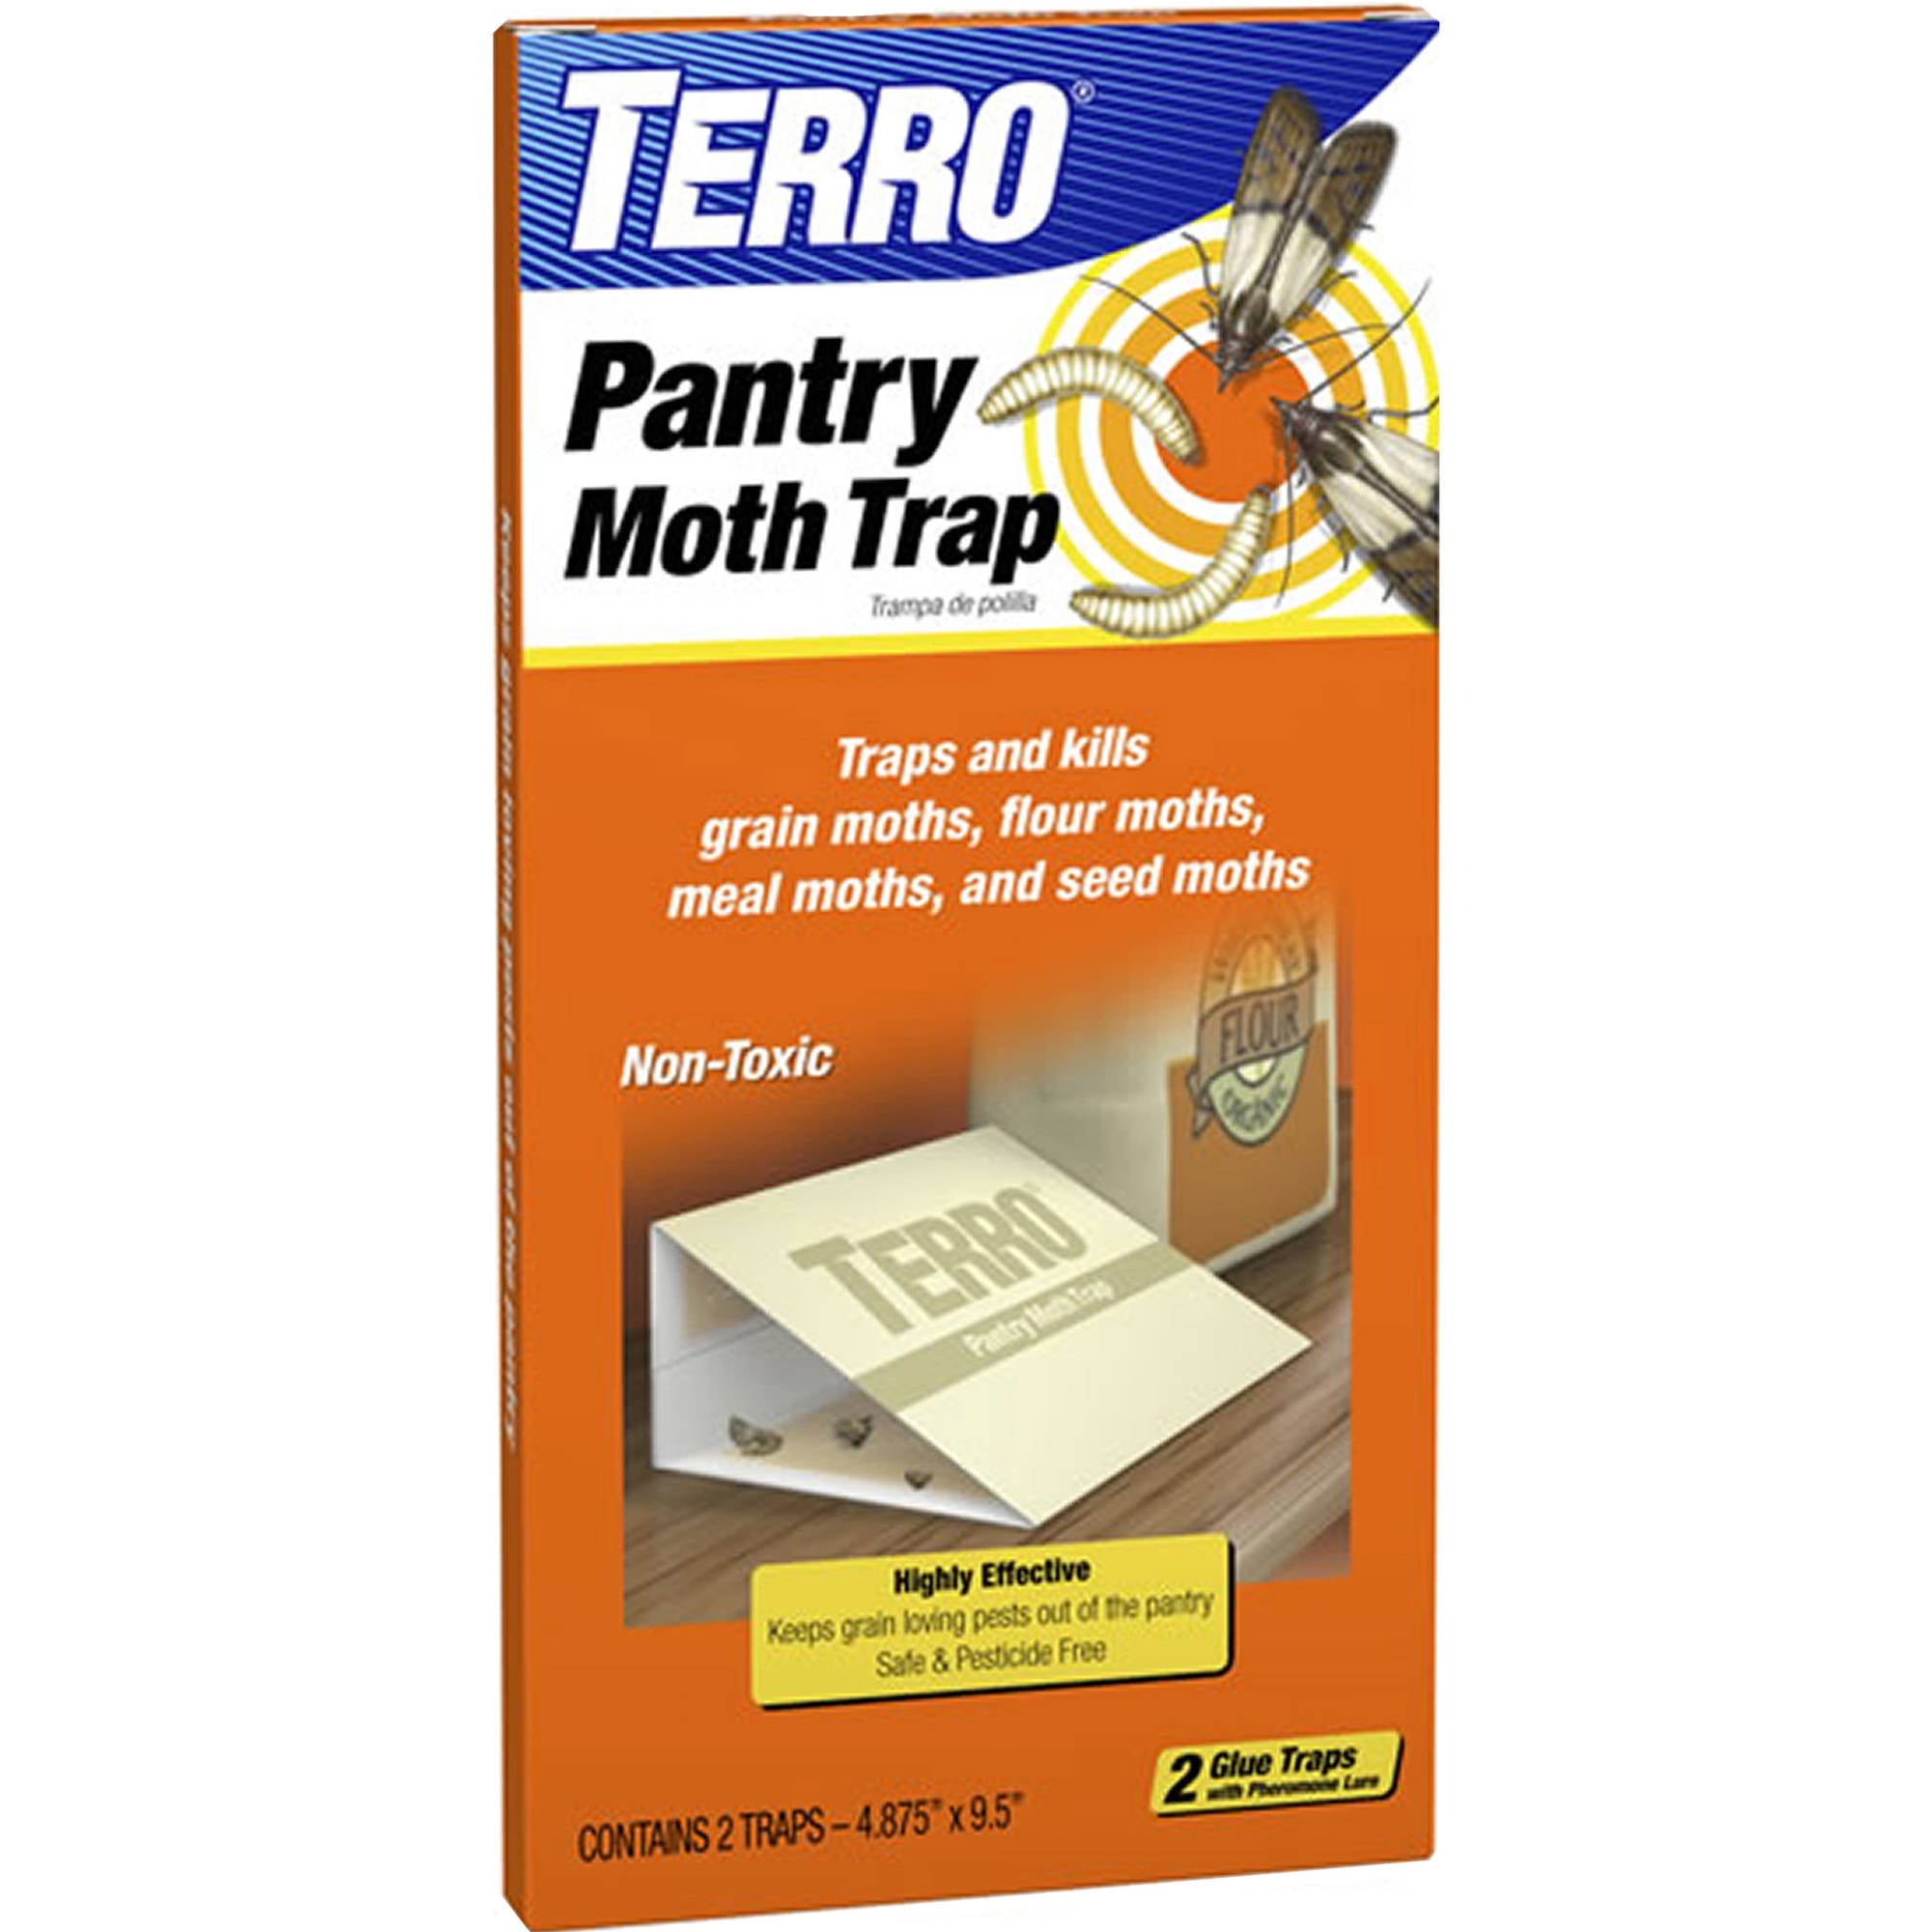 Pantry Moth Traps Glue Traps With Pheromones Adhesive Safe & Effective 8 Pack 